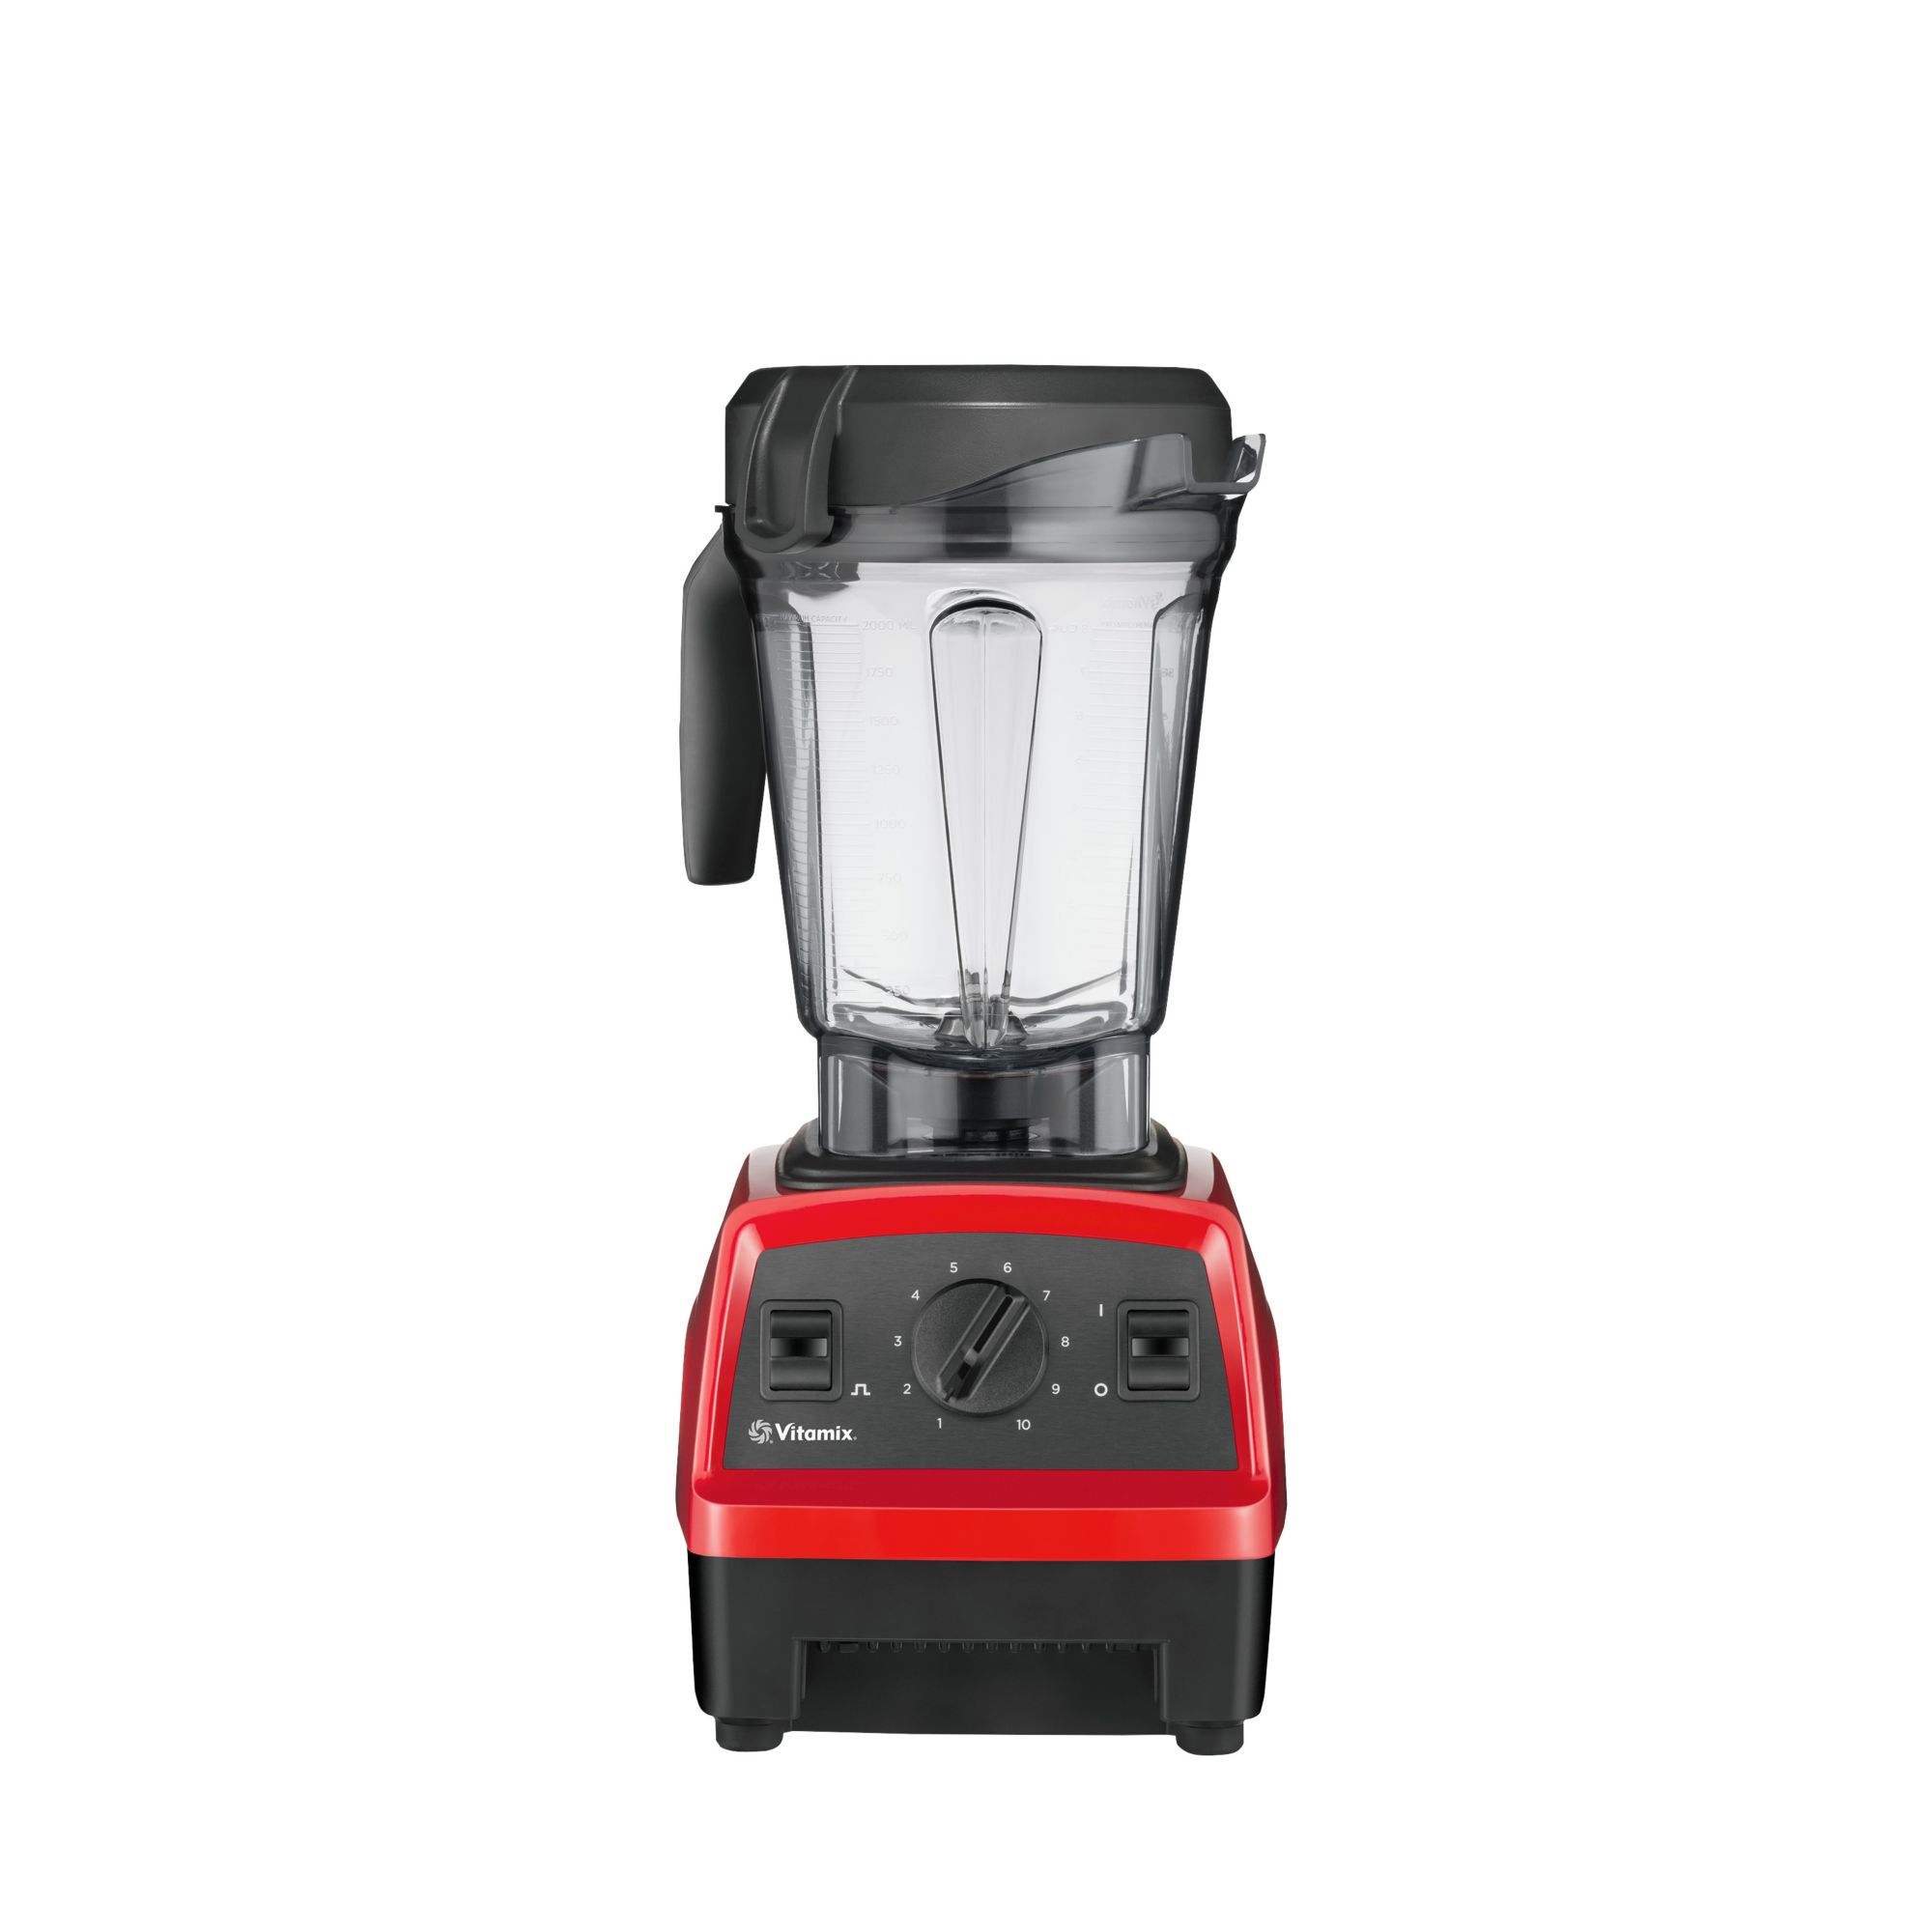 New Ninja Juicer Full Review and Demo 